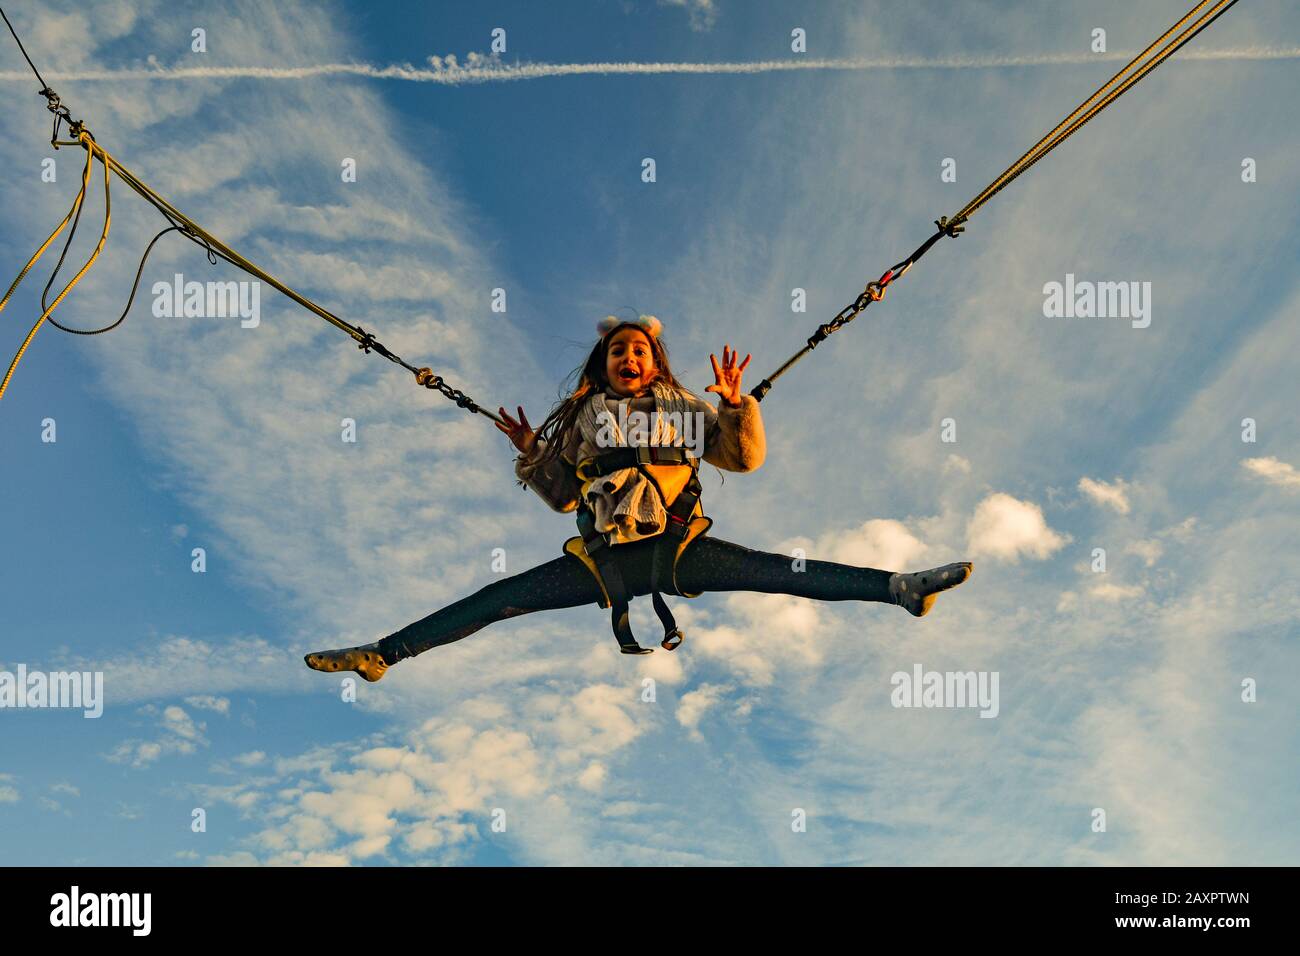 A smiling little girl (9 years old) suspended in the air jumping on a trampoline with clear blue sky background, Italy Stock Photo